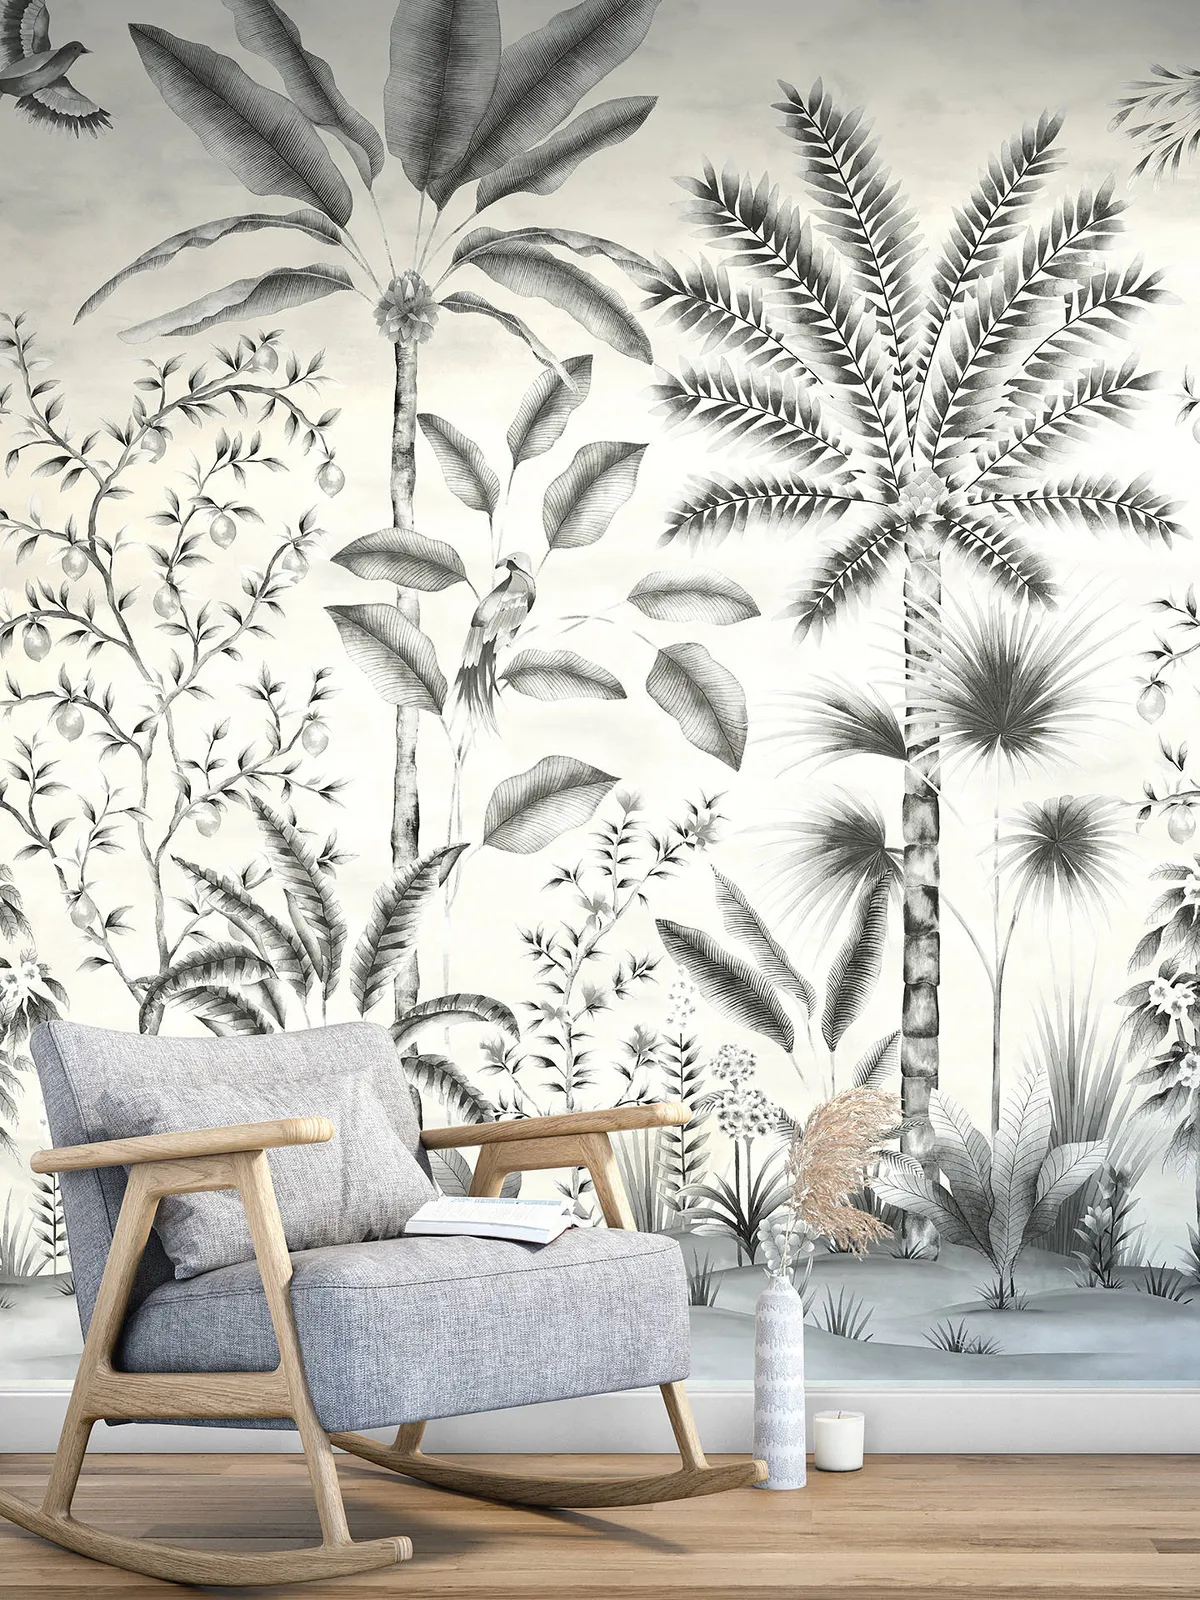 Black and white tropical wall mural